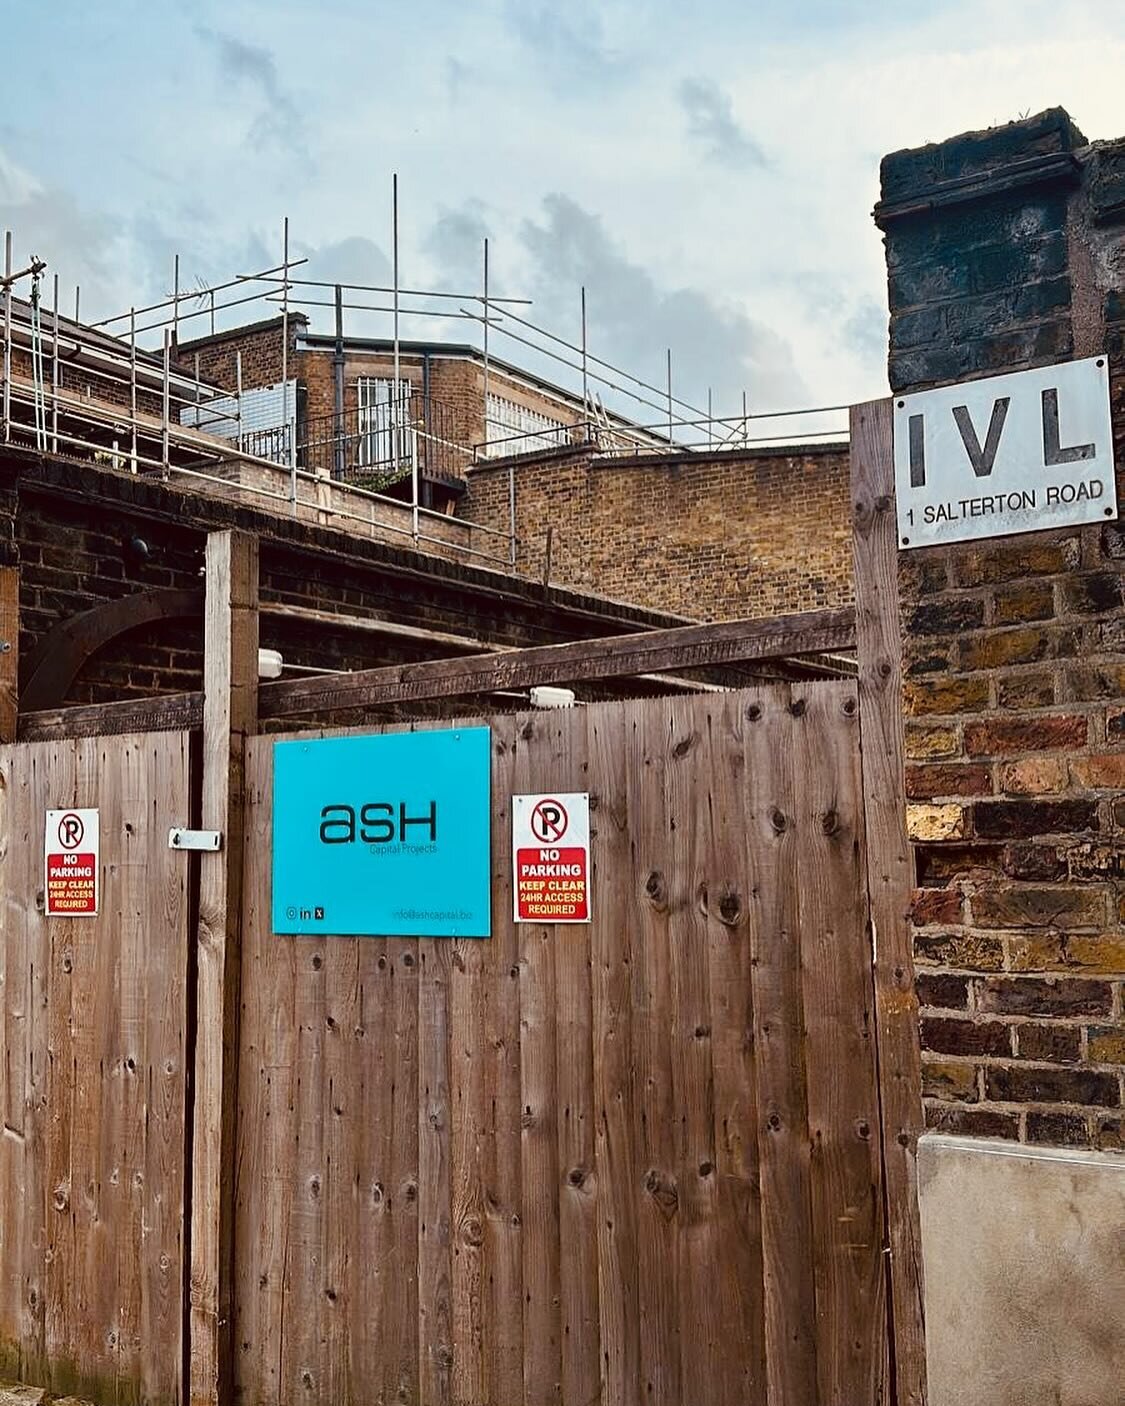 The gates close on another busy week. Thank you team. As always been non stop commitment and We go again next week.
#constructionlife #team #london